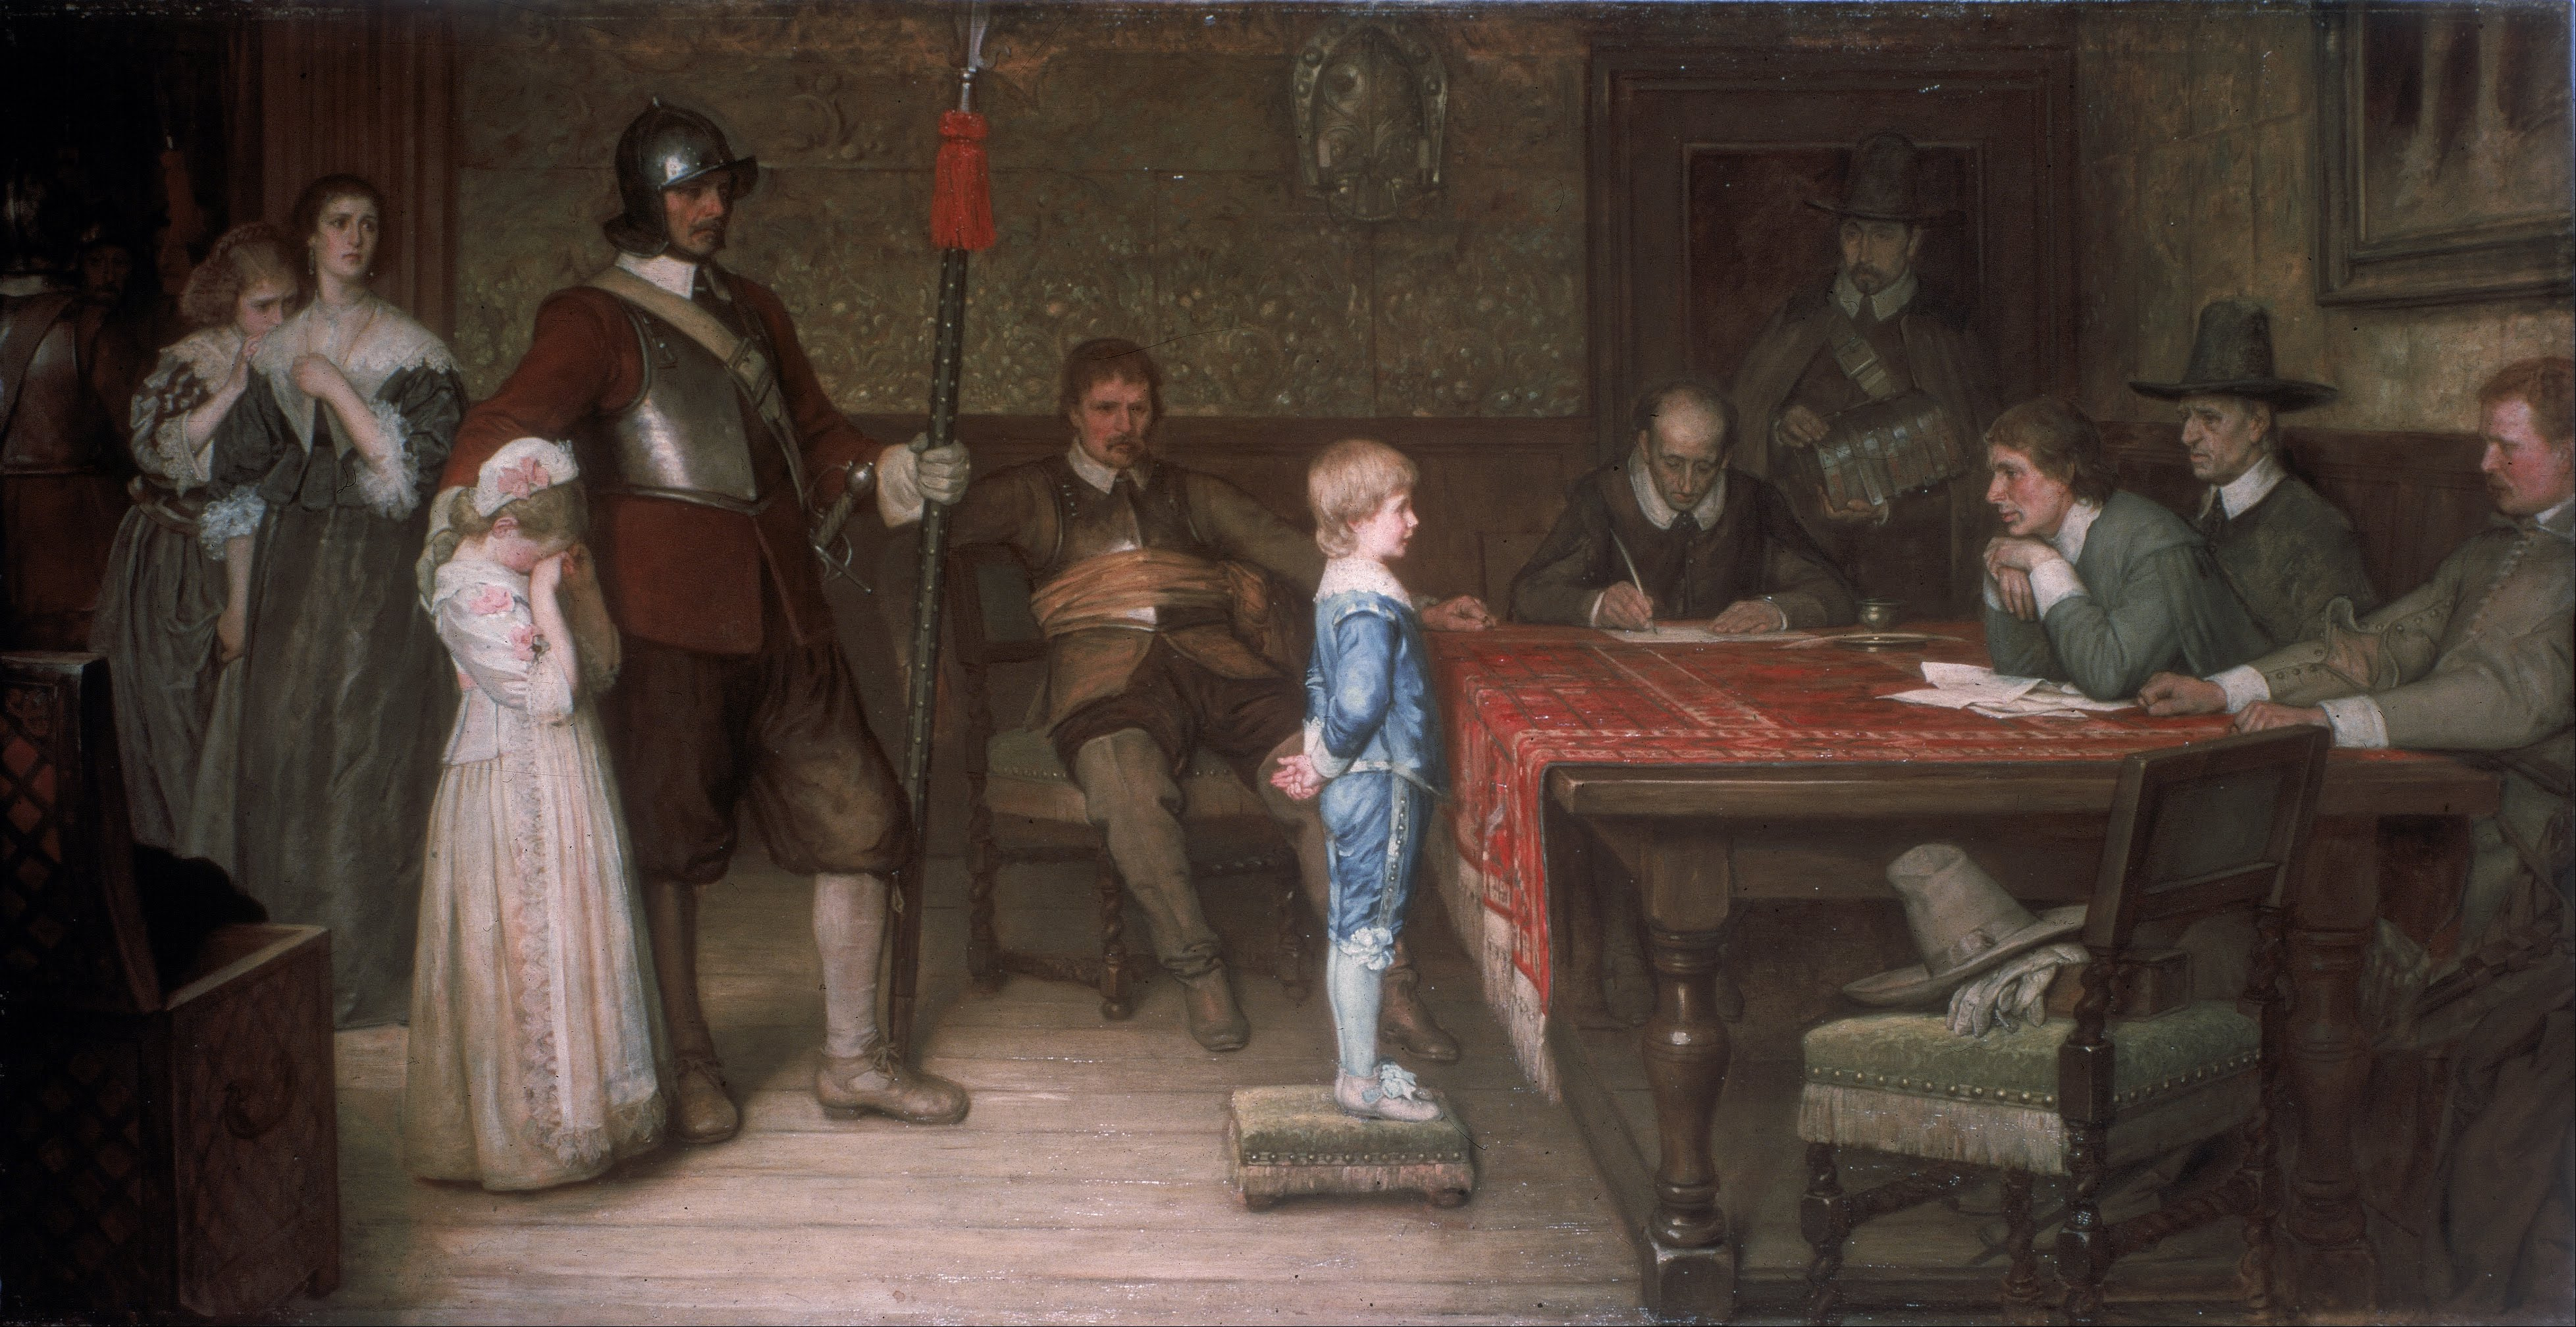 And when did you last see your father by William Frederick Yeames